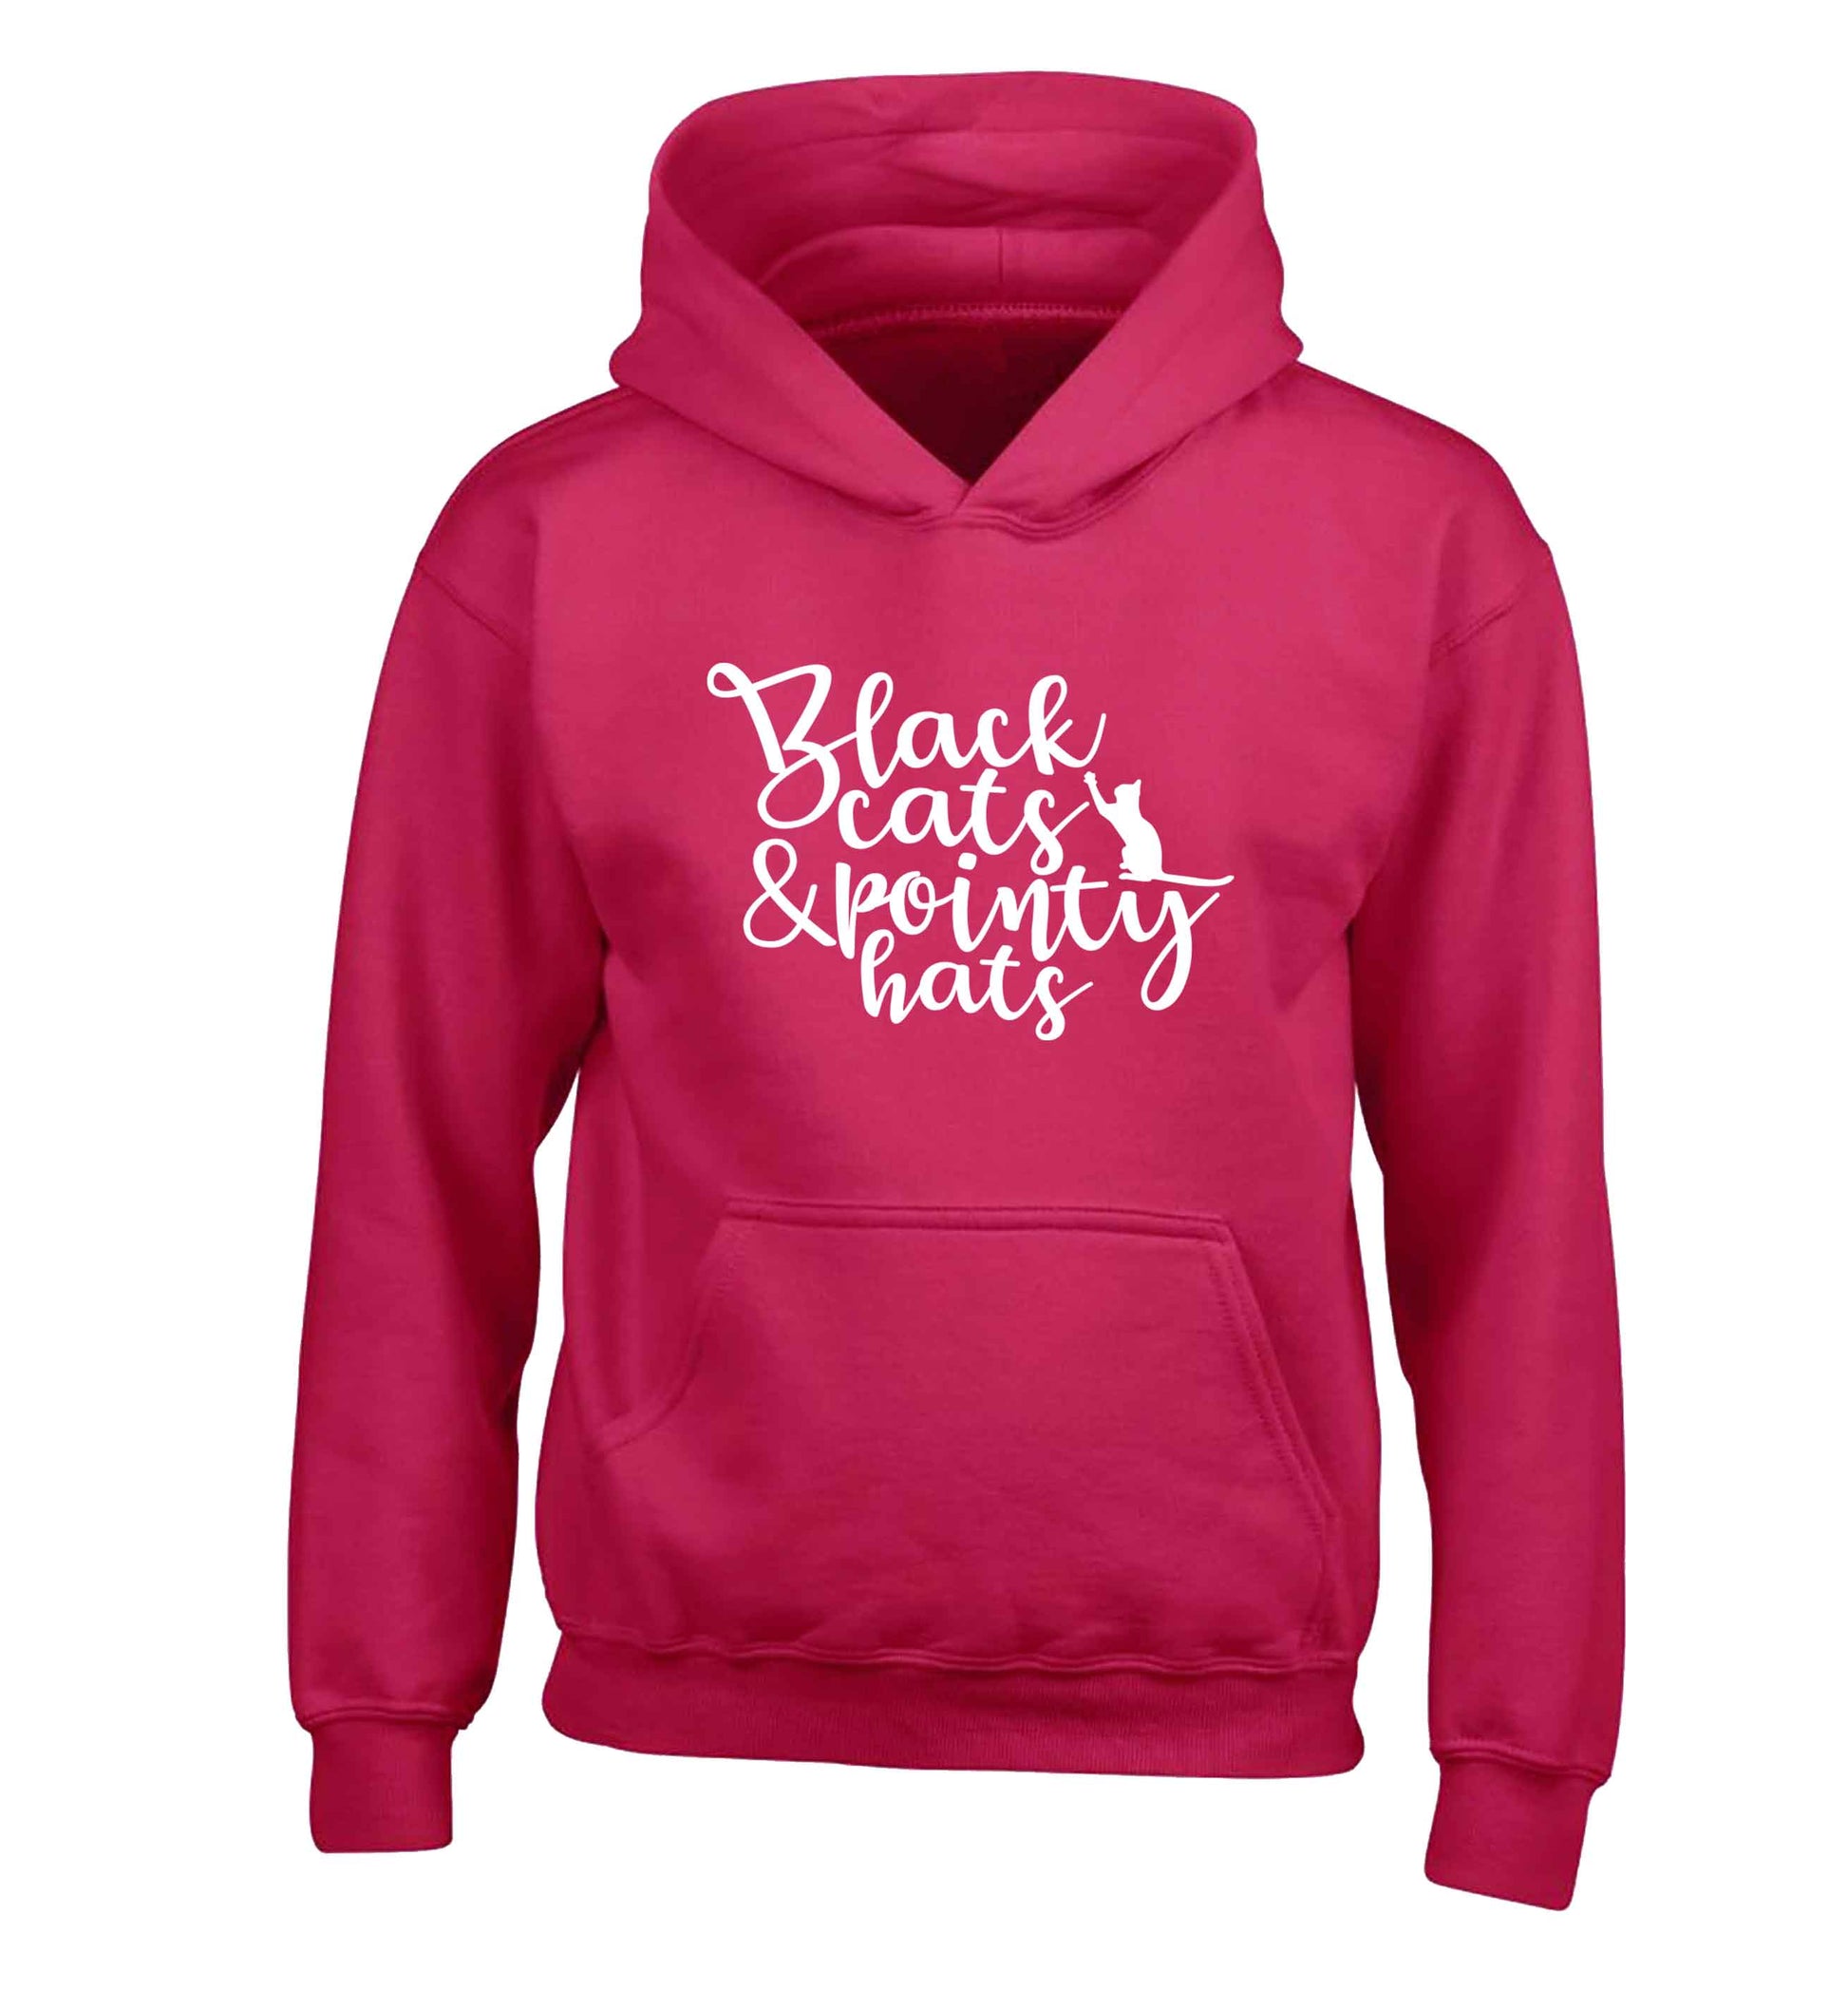 Black cats and pointy hats children's pink hoodie 12-13 Years